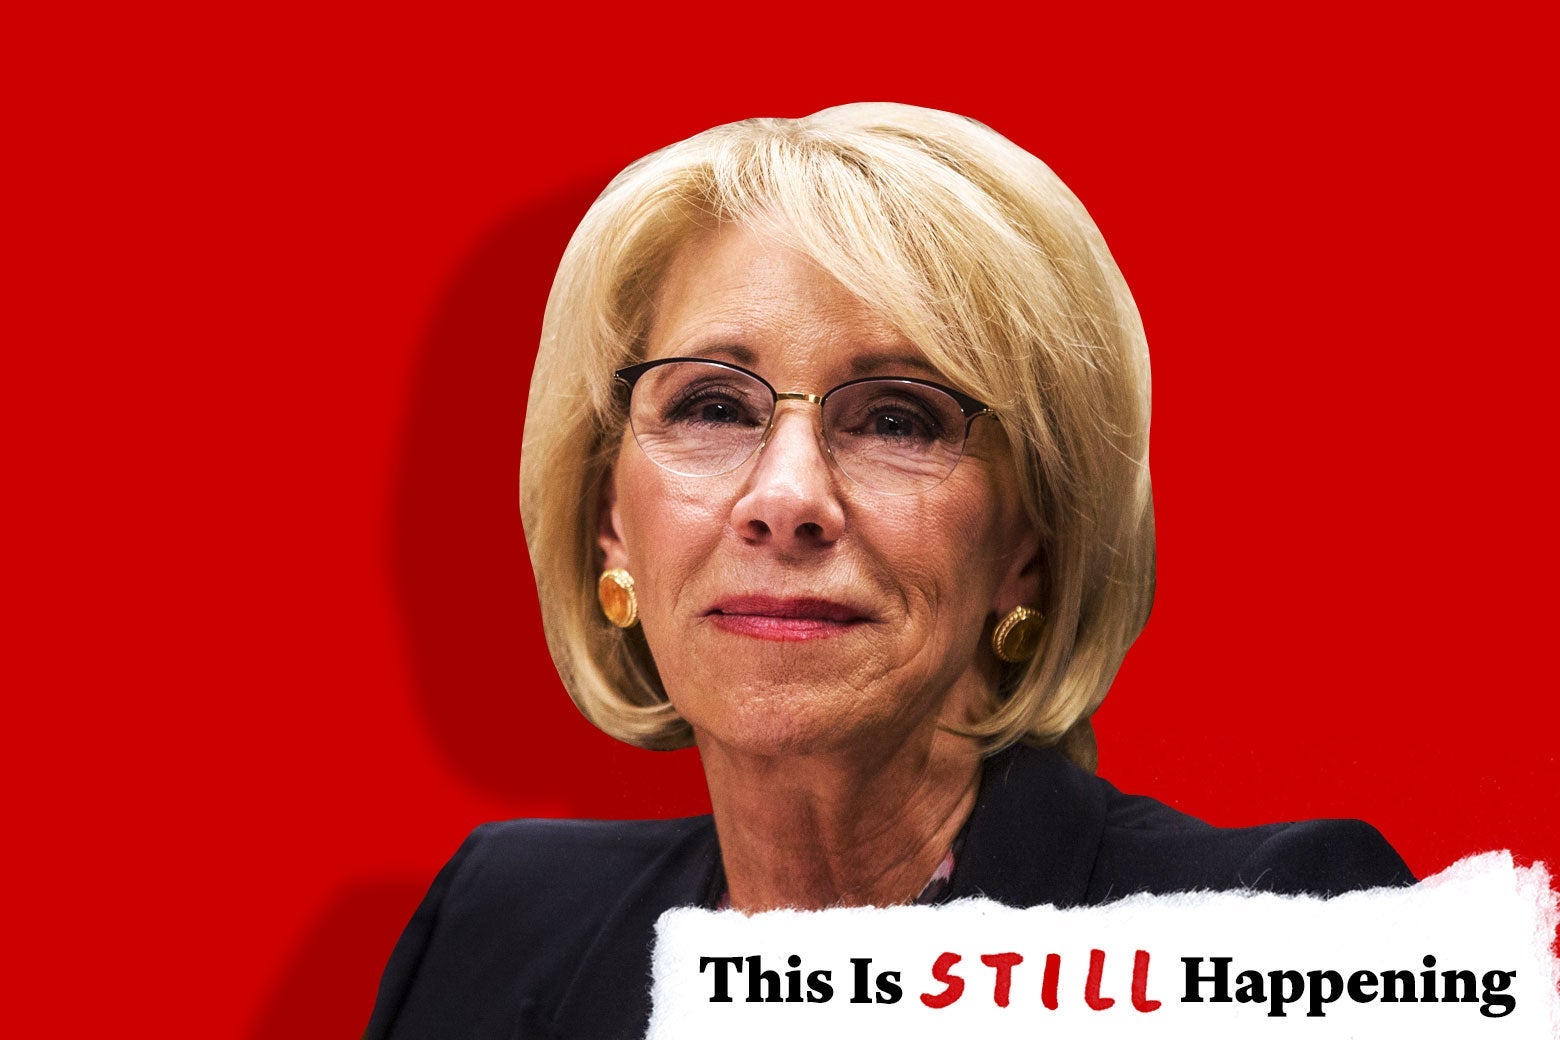 Photo illustration of Betsy DeVos, as seen on March 28, against a red background with the "This Is Still Happening" logo.